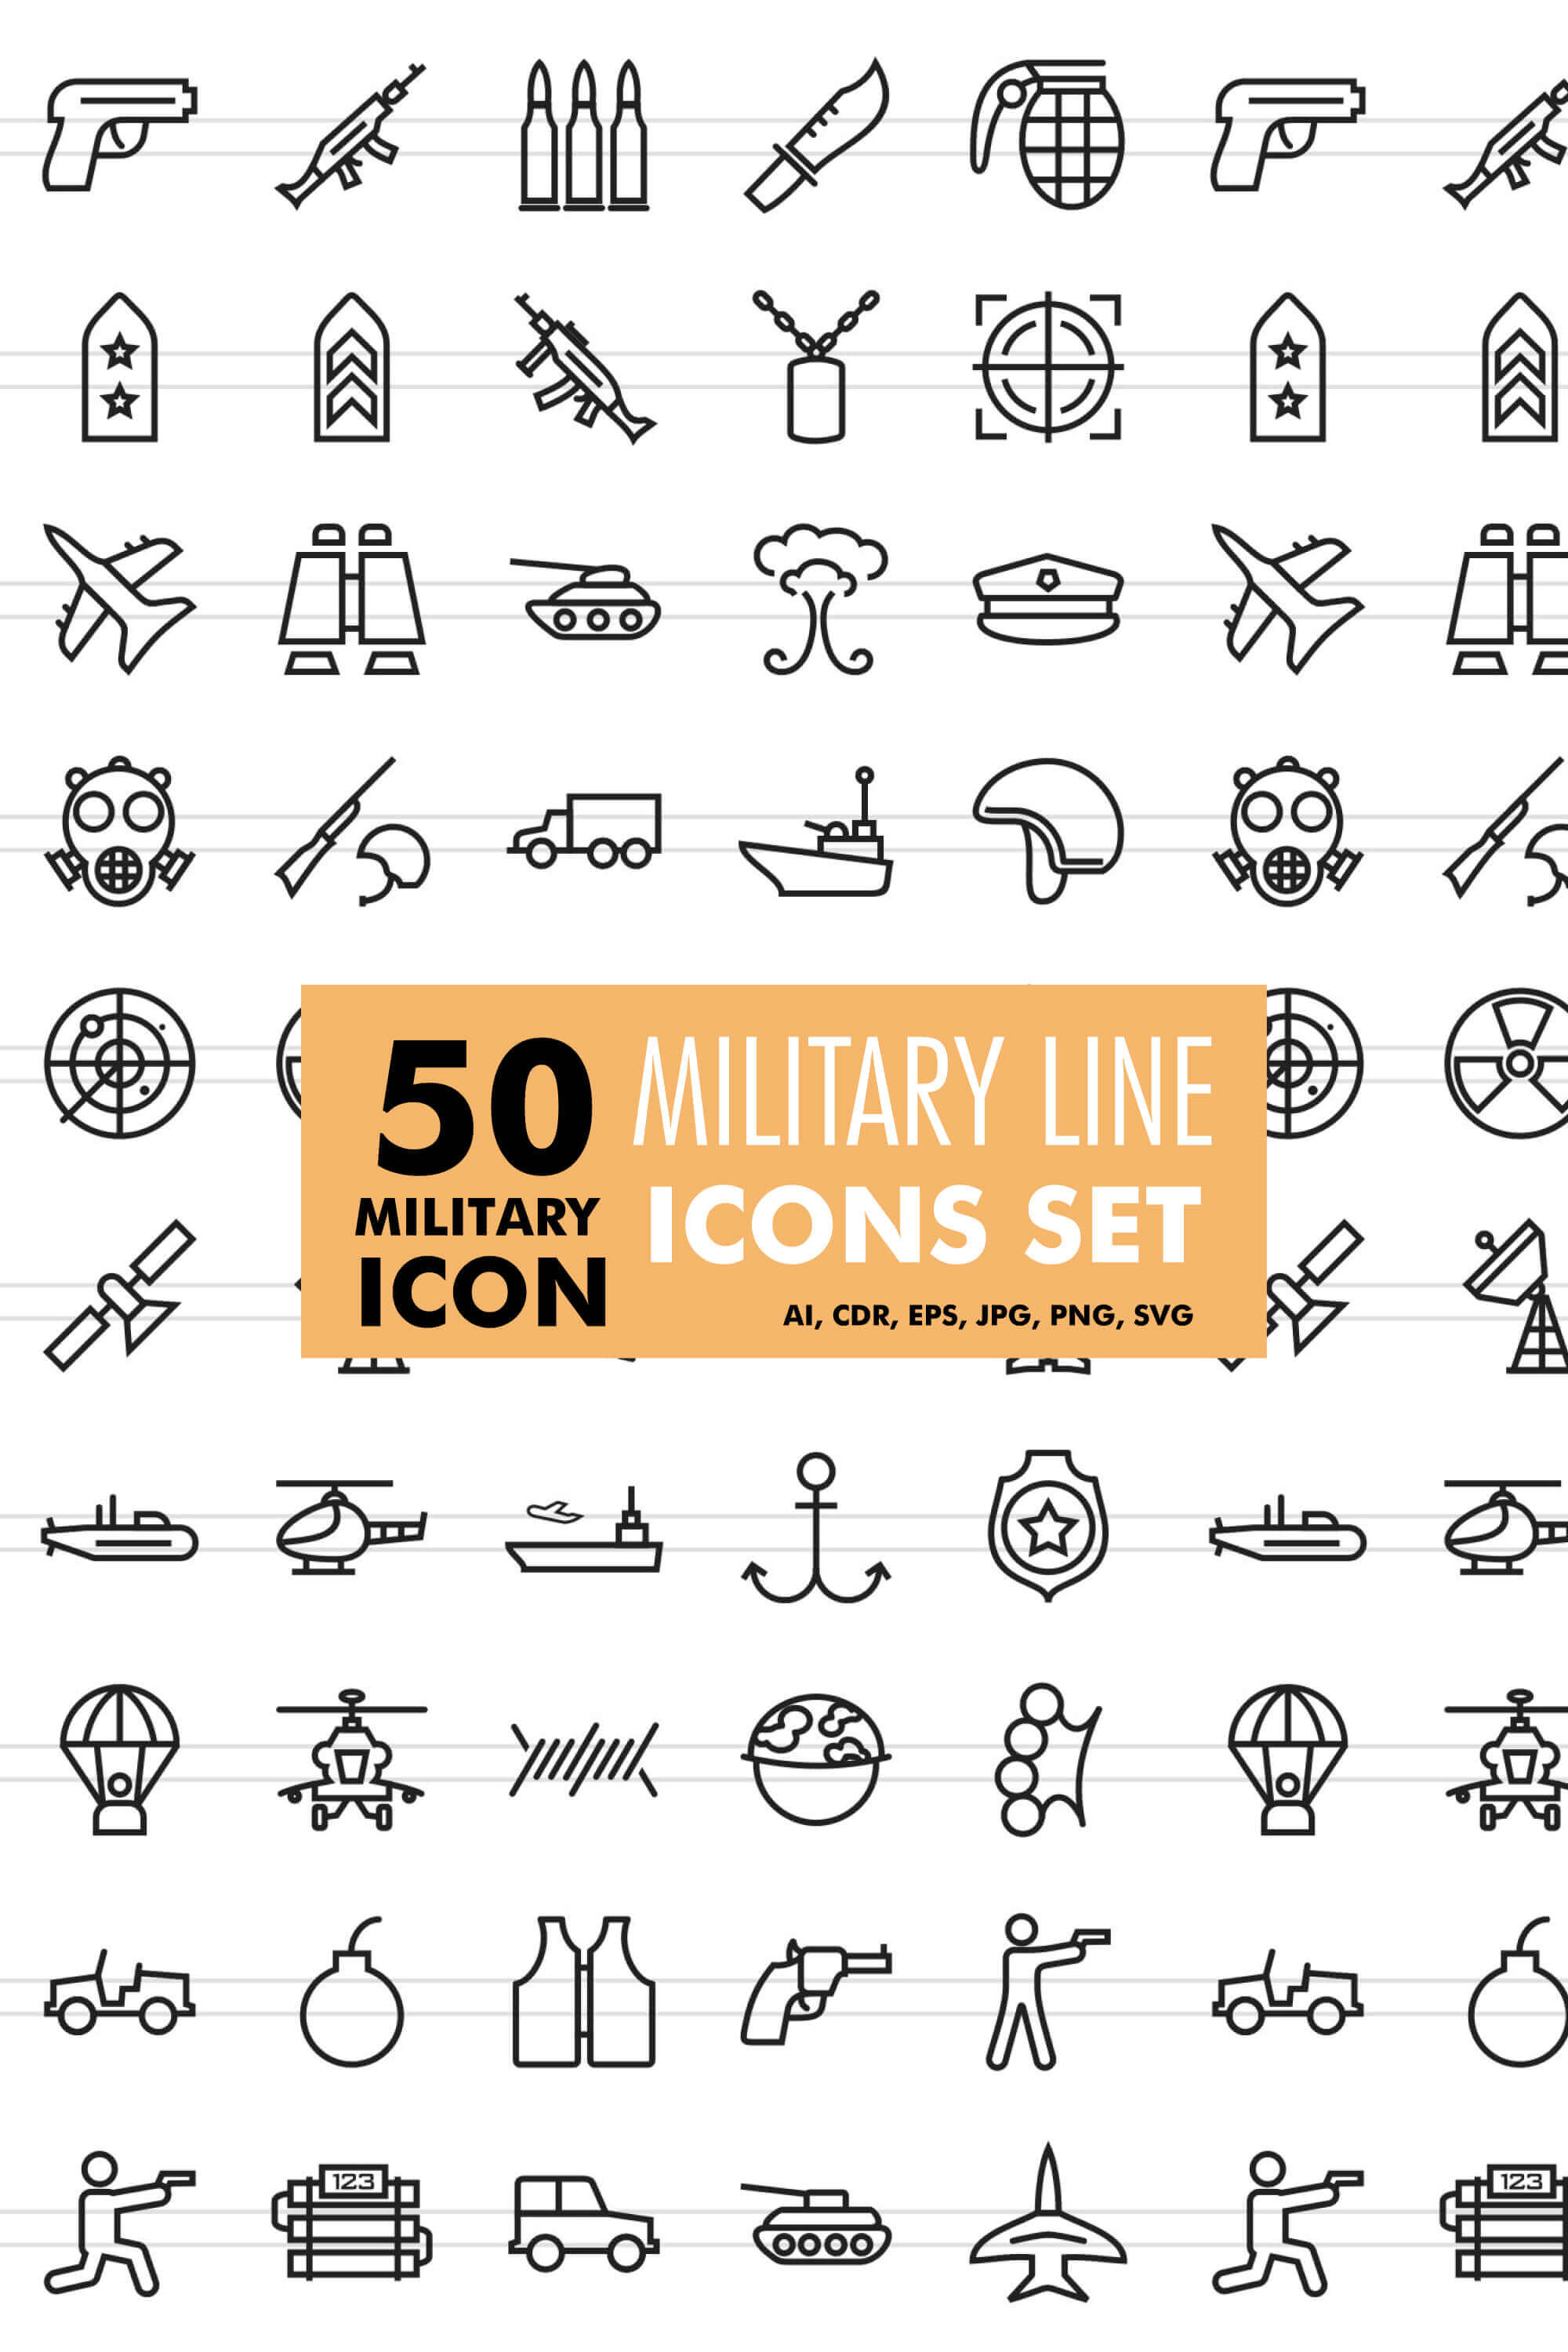 Icons with the image of shoulder straps with stars, binoculars and military equipment.